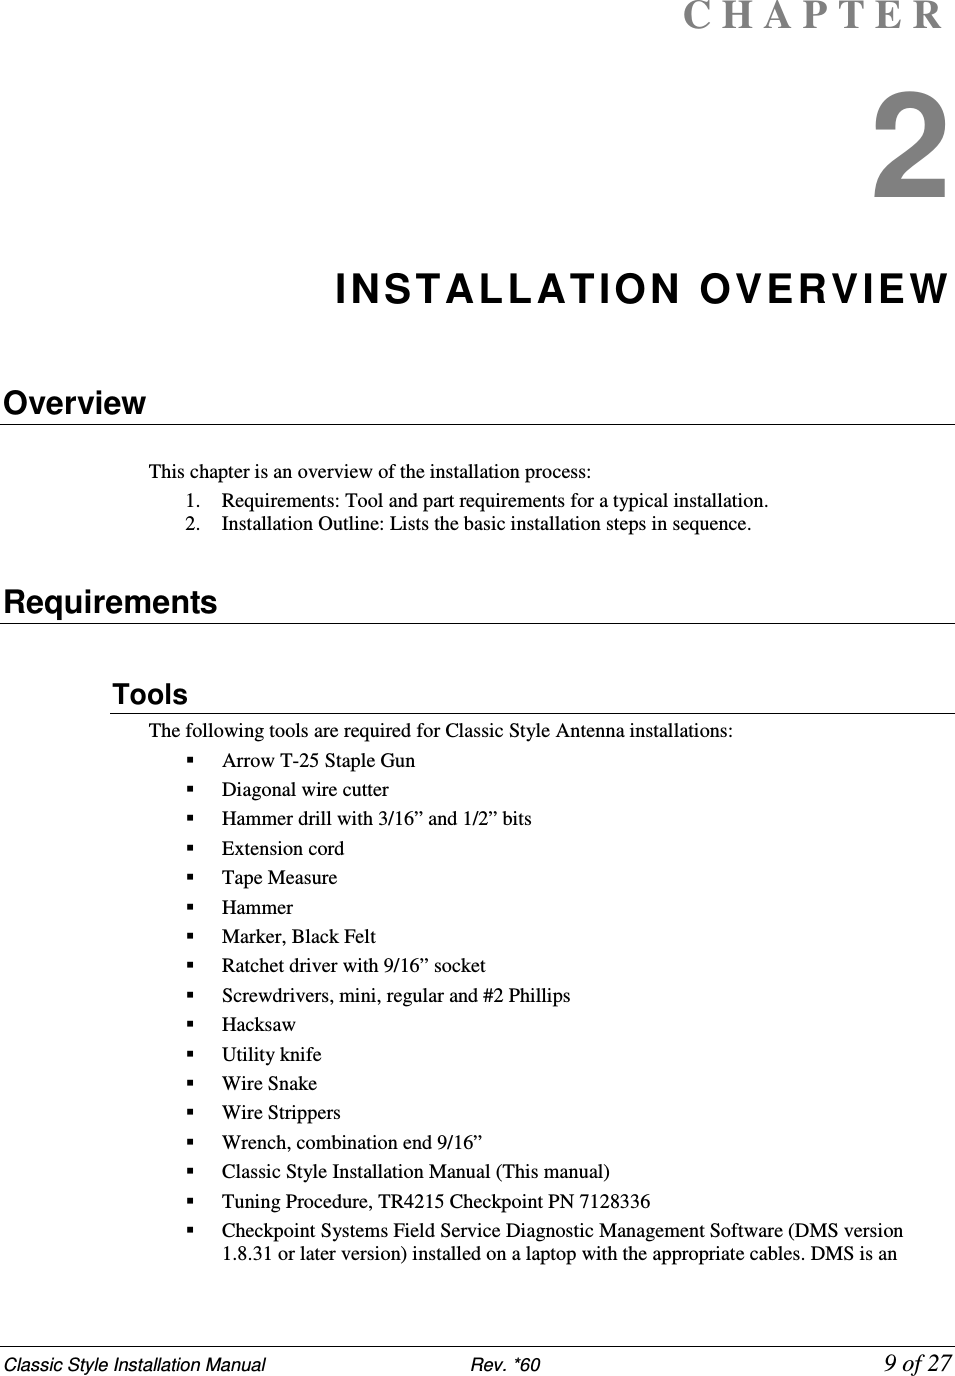 Classic Style Installation Manual                           Rev. *60             9 of 27 C H A P T E R  2 INSTALLATION OVERVIEW  Overview  This chapter is an overview of the installation process:  1. Requirements: Tool and part requirements for a typical installation.  2. Installation Outline: Lists the basic installation steps in sequence.   Requirements  Tools  The following tools are required for Classic Style Antenna installations:  Arrow T-25 Staple Gun  Diagonal wire cutter   Hammer drill with 3/16” and 1/2” bits  Extension cord   Tape Measure  Hammer   Marker, Black Felt   Ratchet driver with 9/16” socket  Screwdrivers, mini, regular and #2 Phillips   Hacksaw  Utility knife  Wire Snake  Wire Strippers   Wrench, combination end 9/16”  Classic Style Installation Manual (This manual)  Tuning Procedure, TR4215 Checkpoint PN 7128336   Checkpoint Systems Field Service Diagnostic Management Software (DMS version 1.8.31 or later version) installed on a laptop with the appropriate cables. DMS is an 